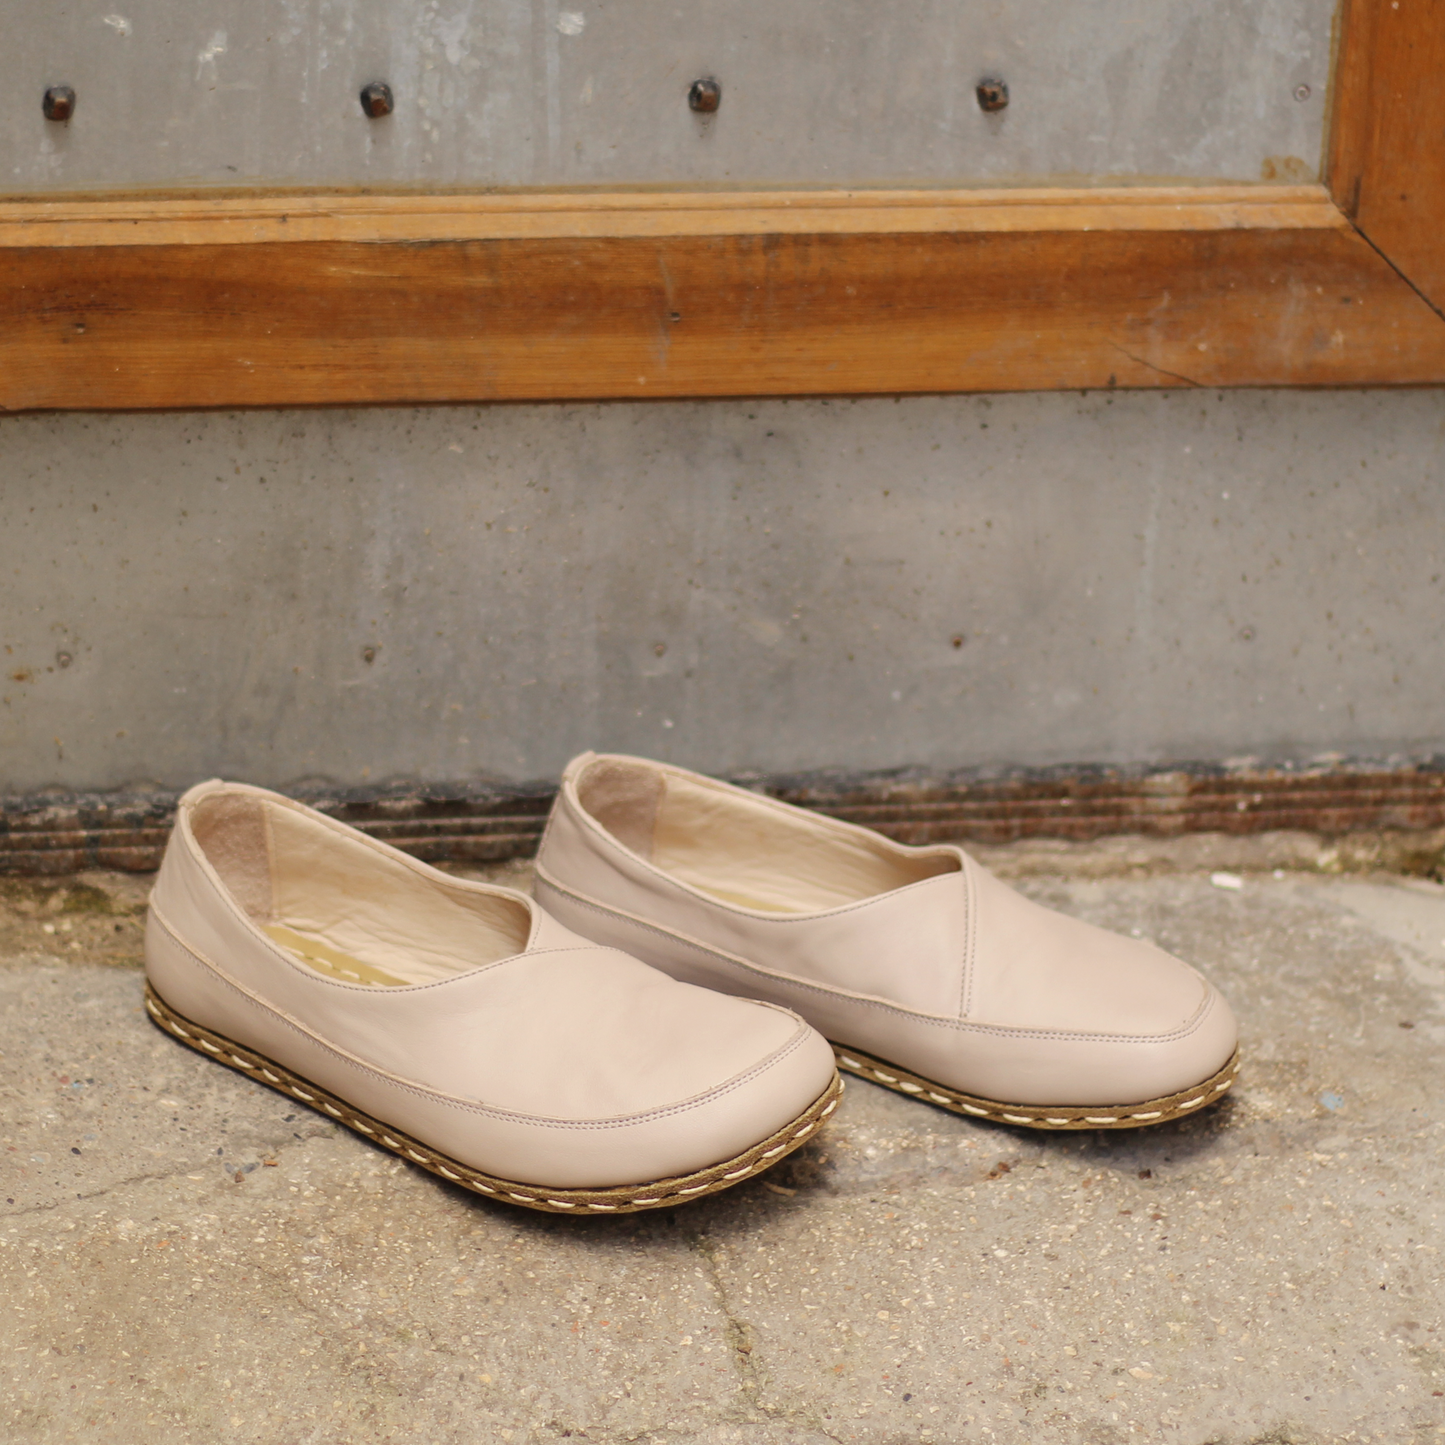 Women's Handmade Barefoot Loafers in Genuine Ice Cream Leather